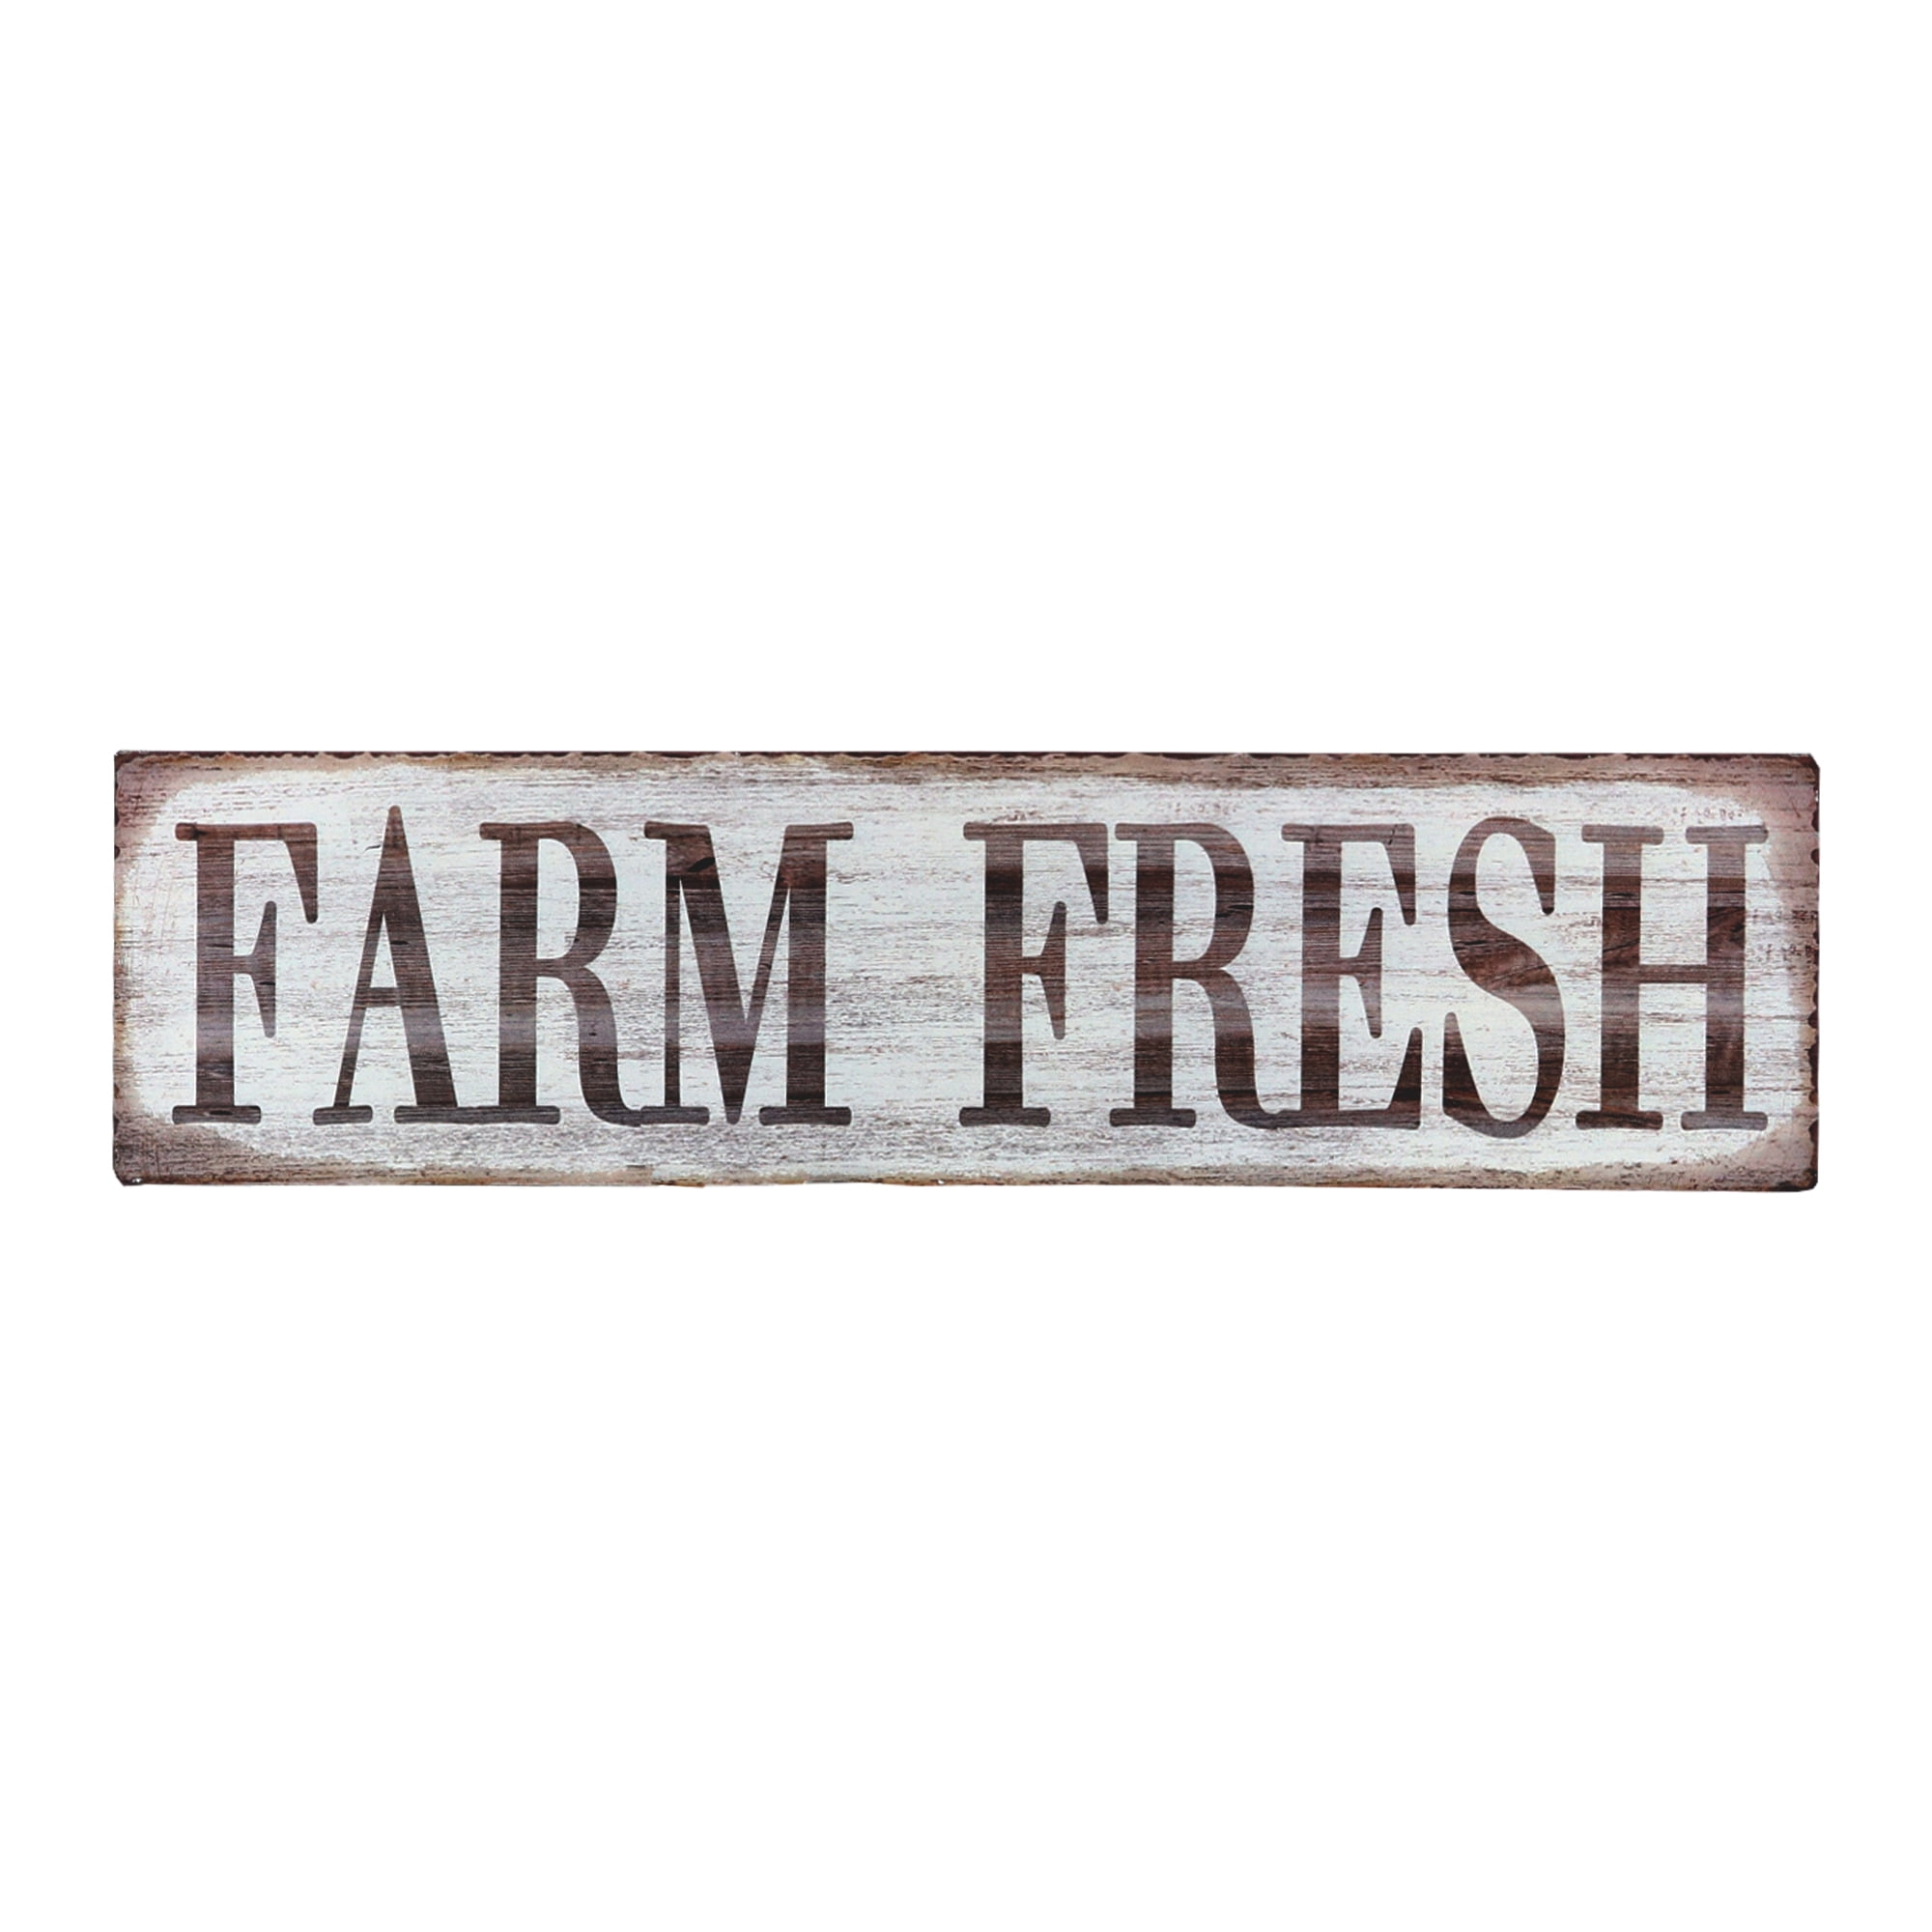 Farm House Retro Vintage Tin Bar Sign Country Home Decor 15.75 x 4,Decoration Vintage Metal Signs for Home House Yard Door Wall Decor,Pre-Cut Holes for Easy Wall Hanging